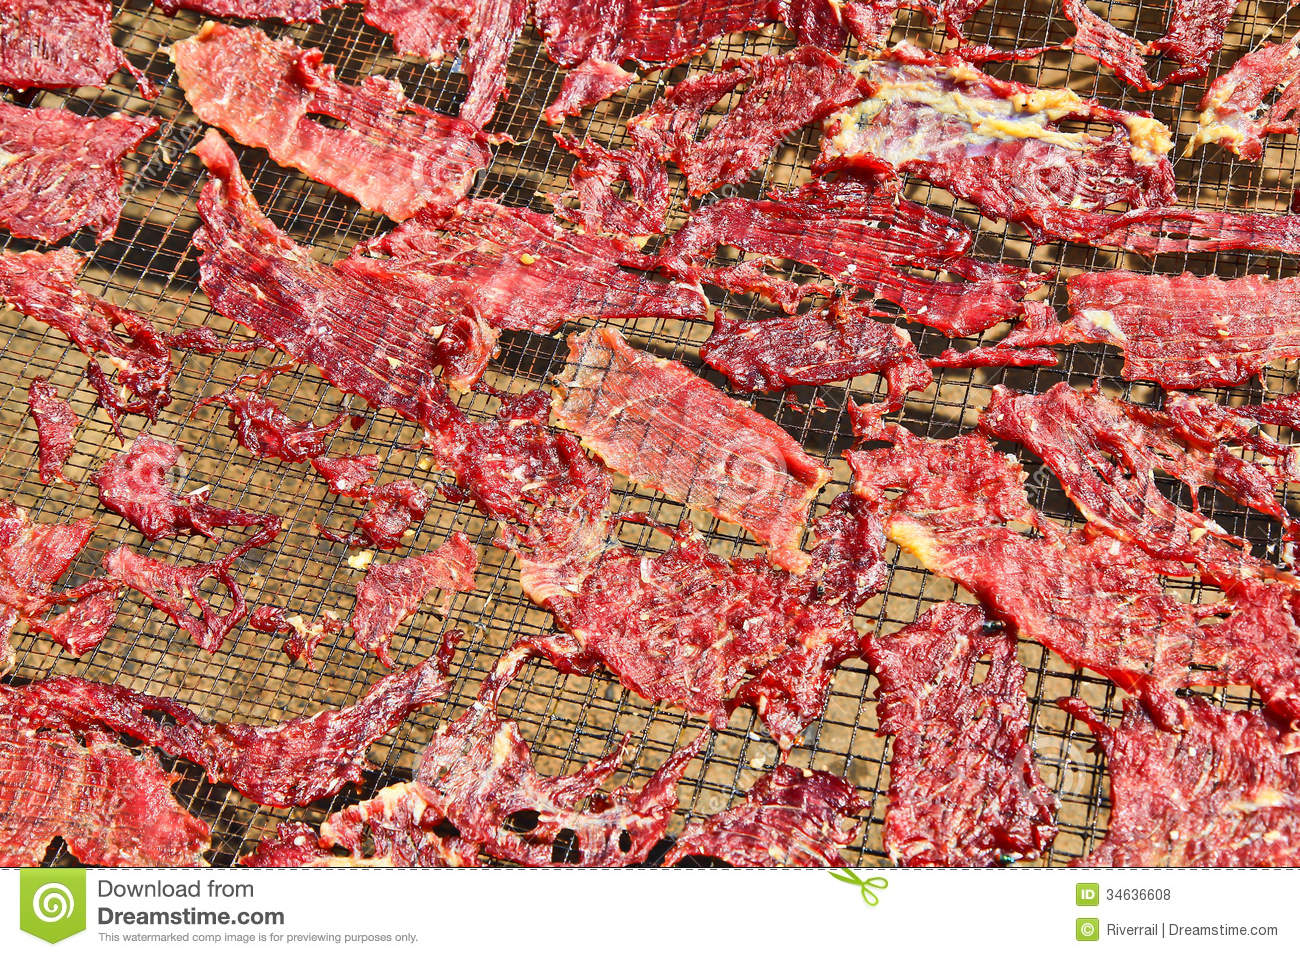 Dried Meat Royalty Free Stock Photos   Image  34636608